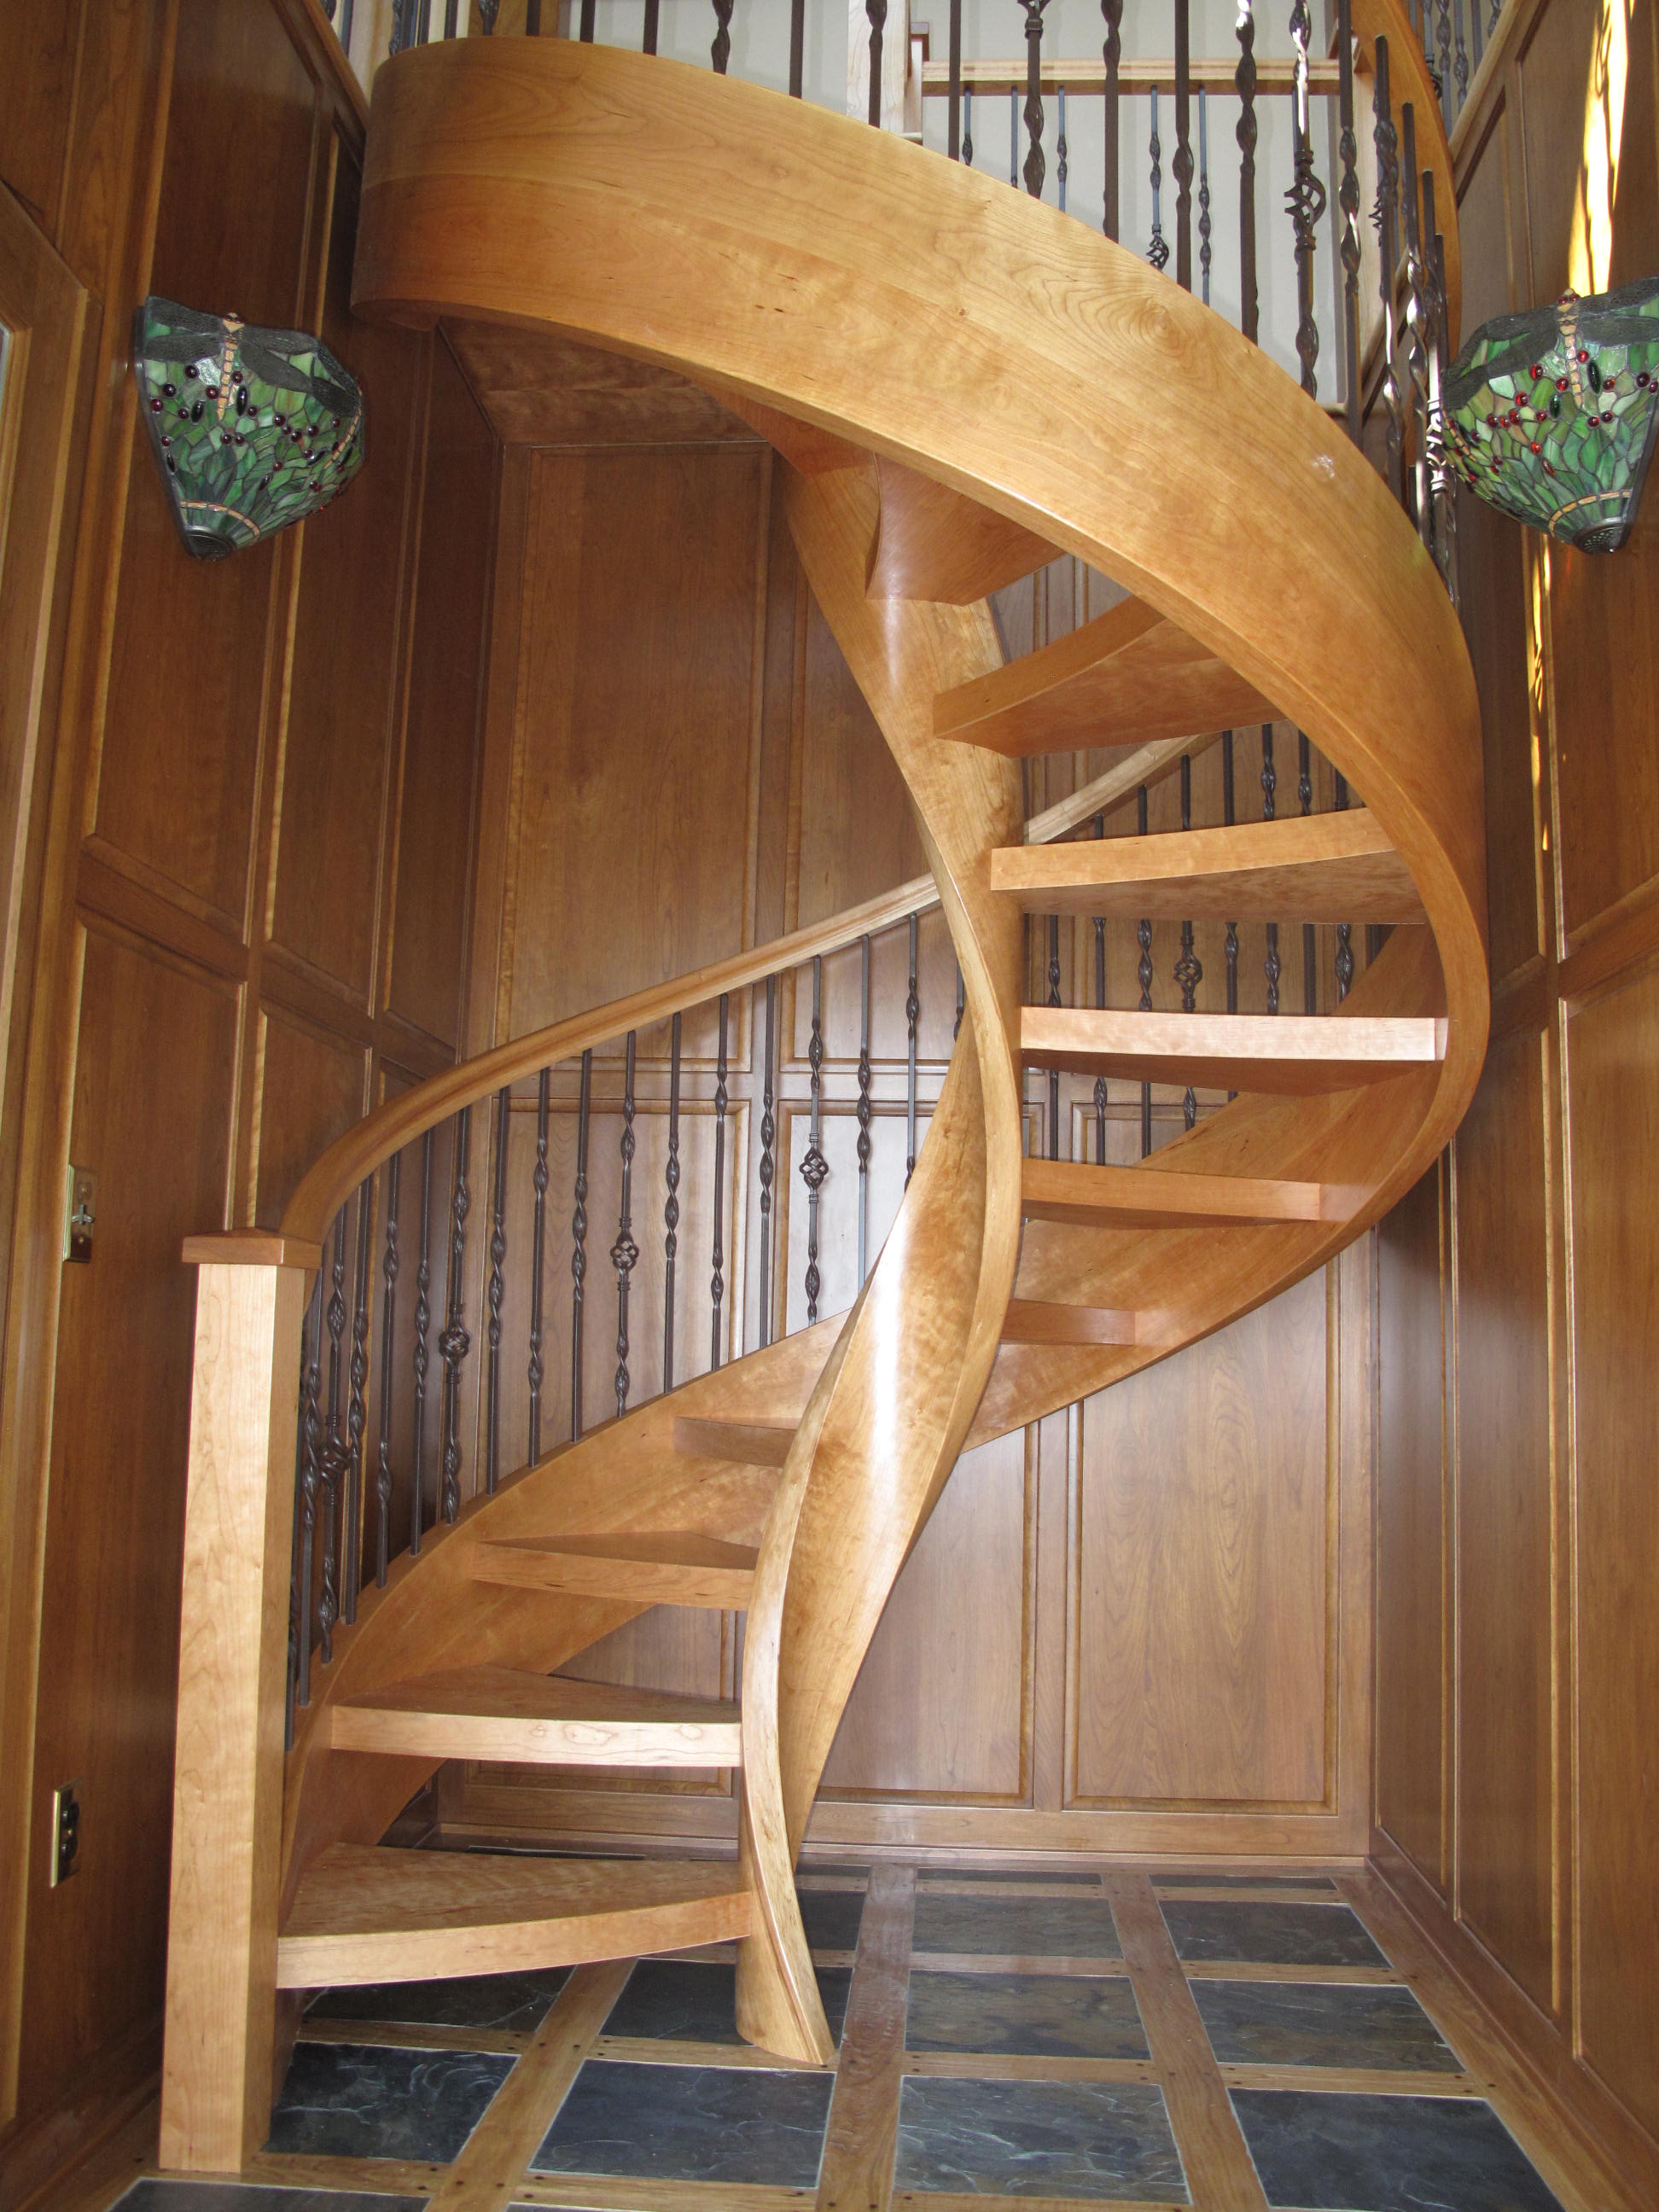 Brown Polished Wooden Spiral Staircase With Wooden Handrail And ...